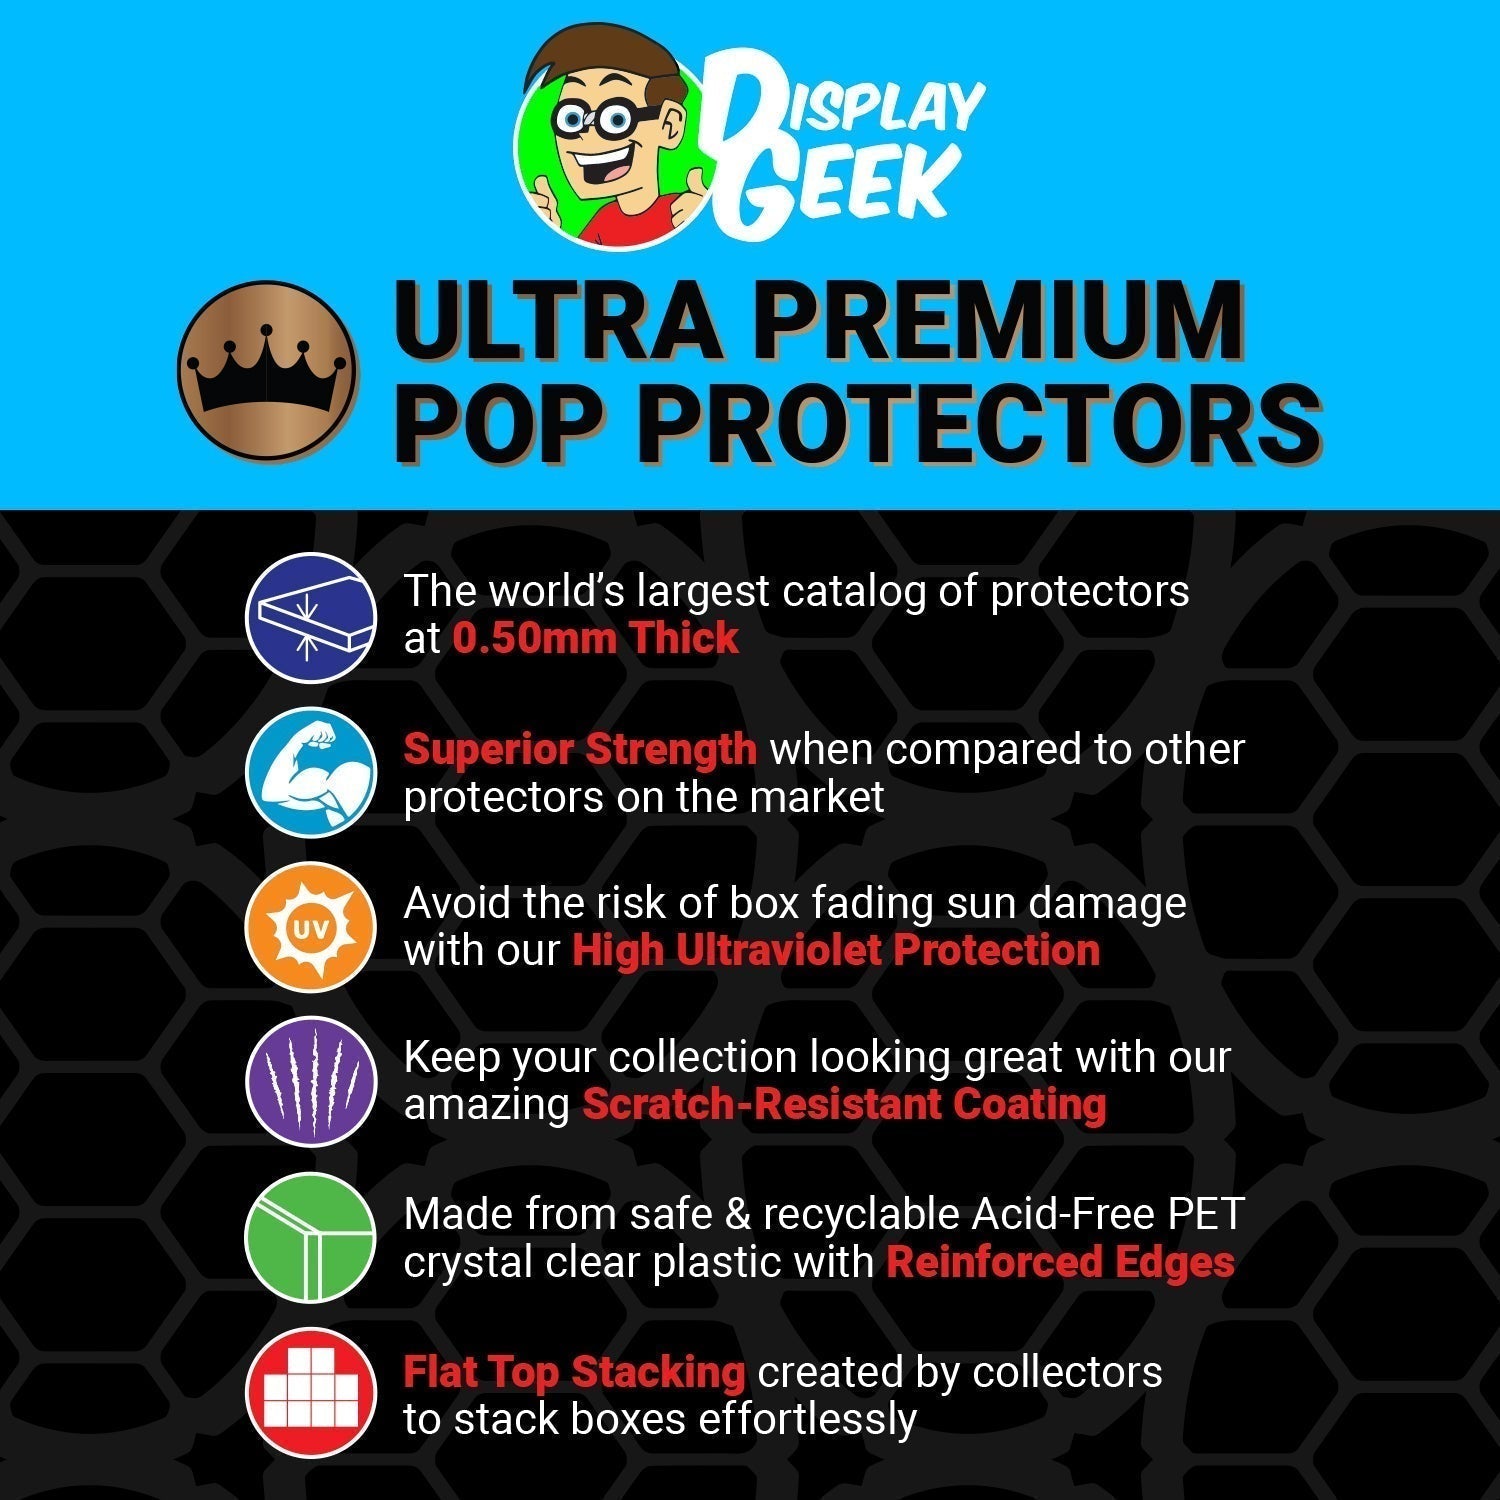 Pop Protector for Flik on Dandelion Seed WonderCon #1330 Funko Pop Deluxe - PPG Pop Protector Guide Search Created by Display Geek